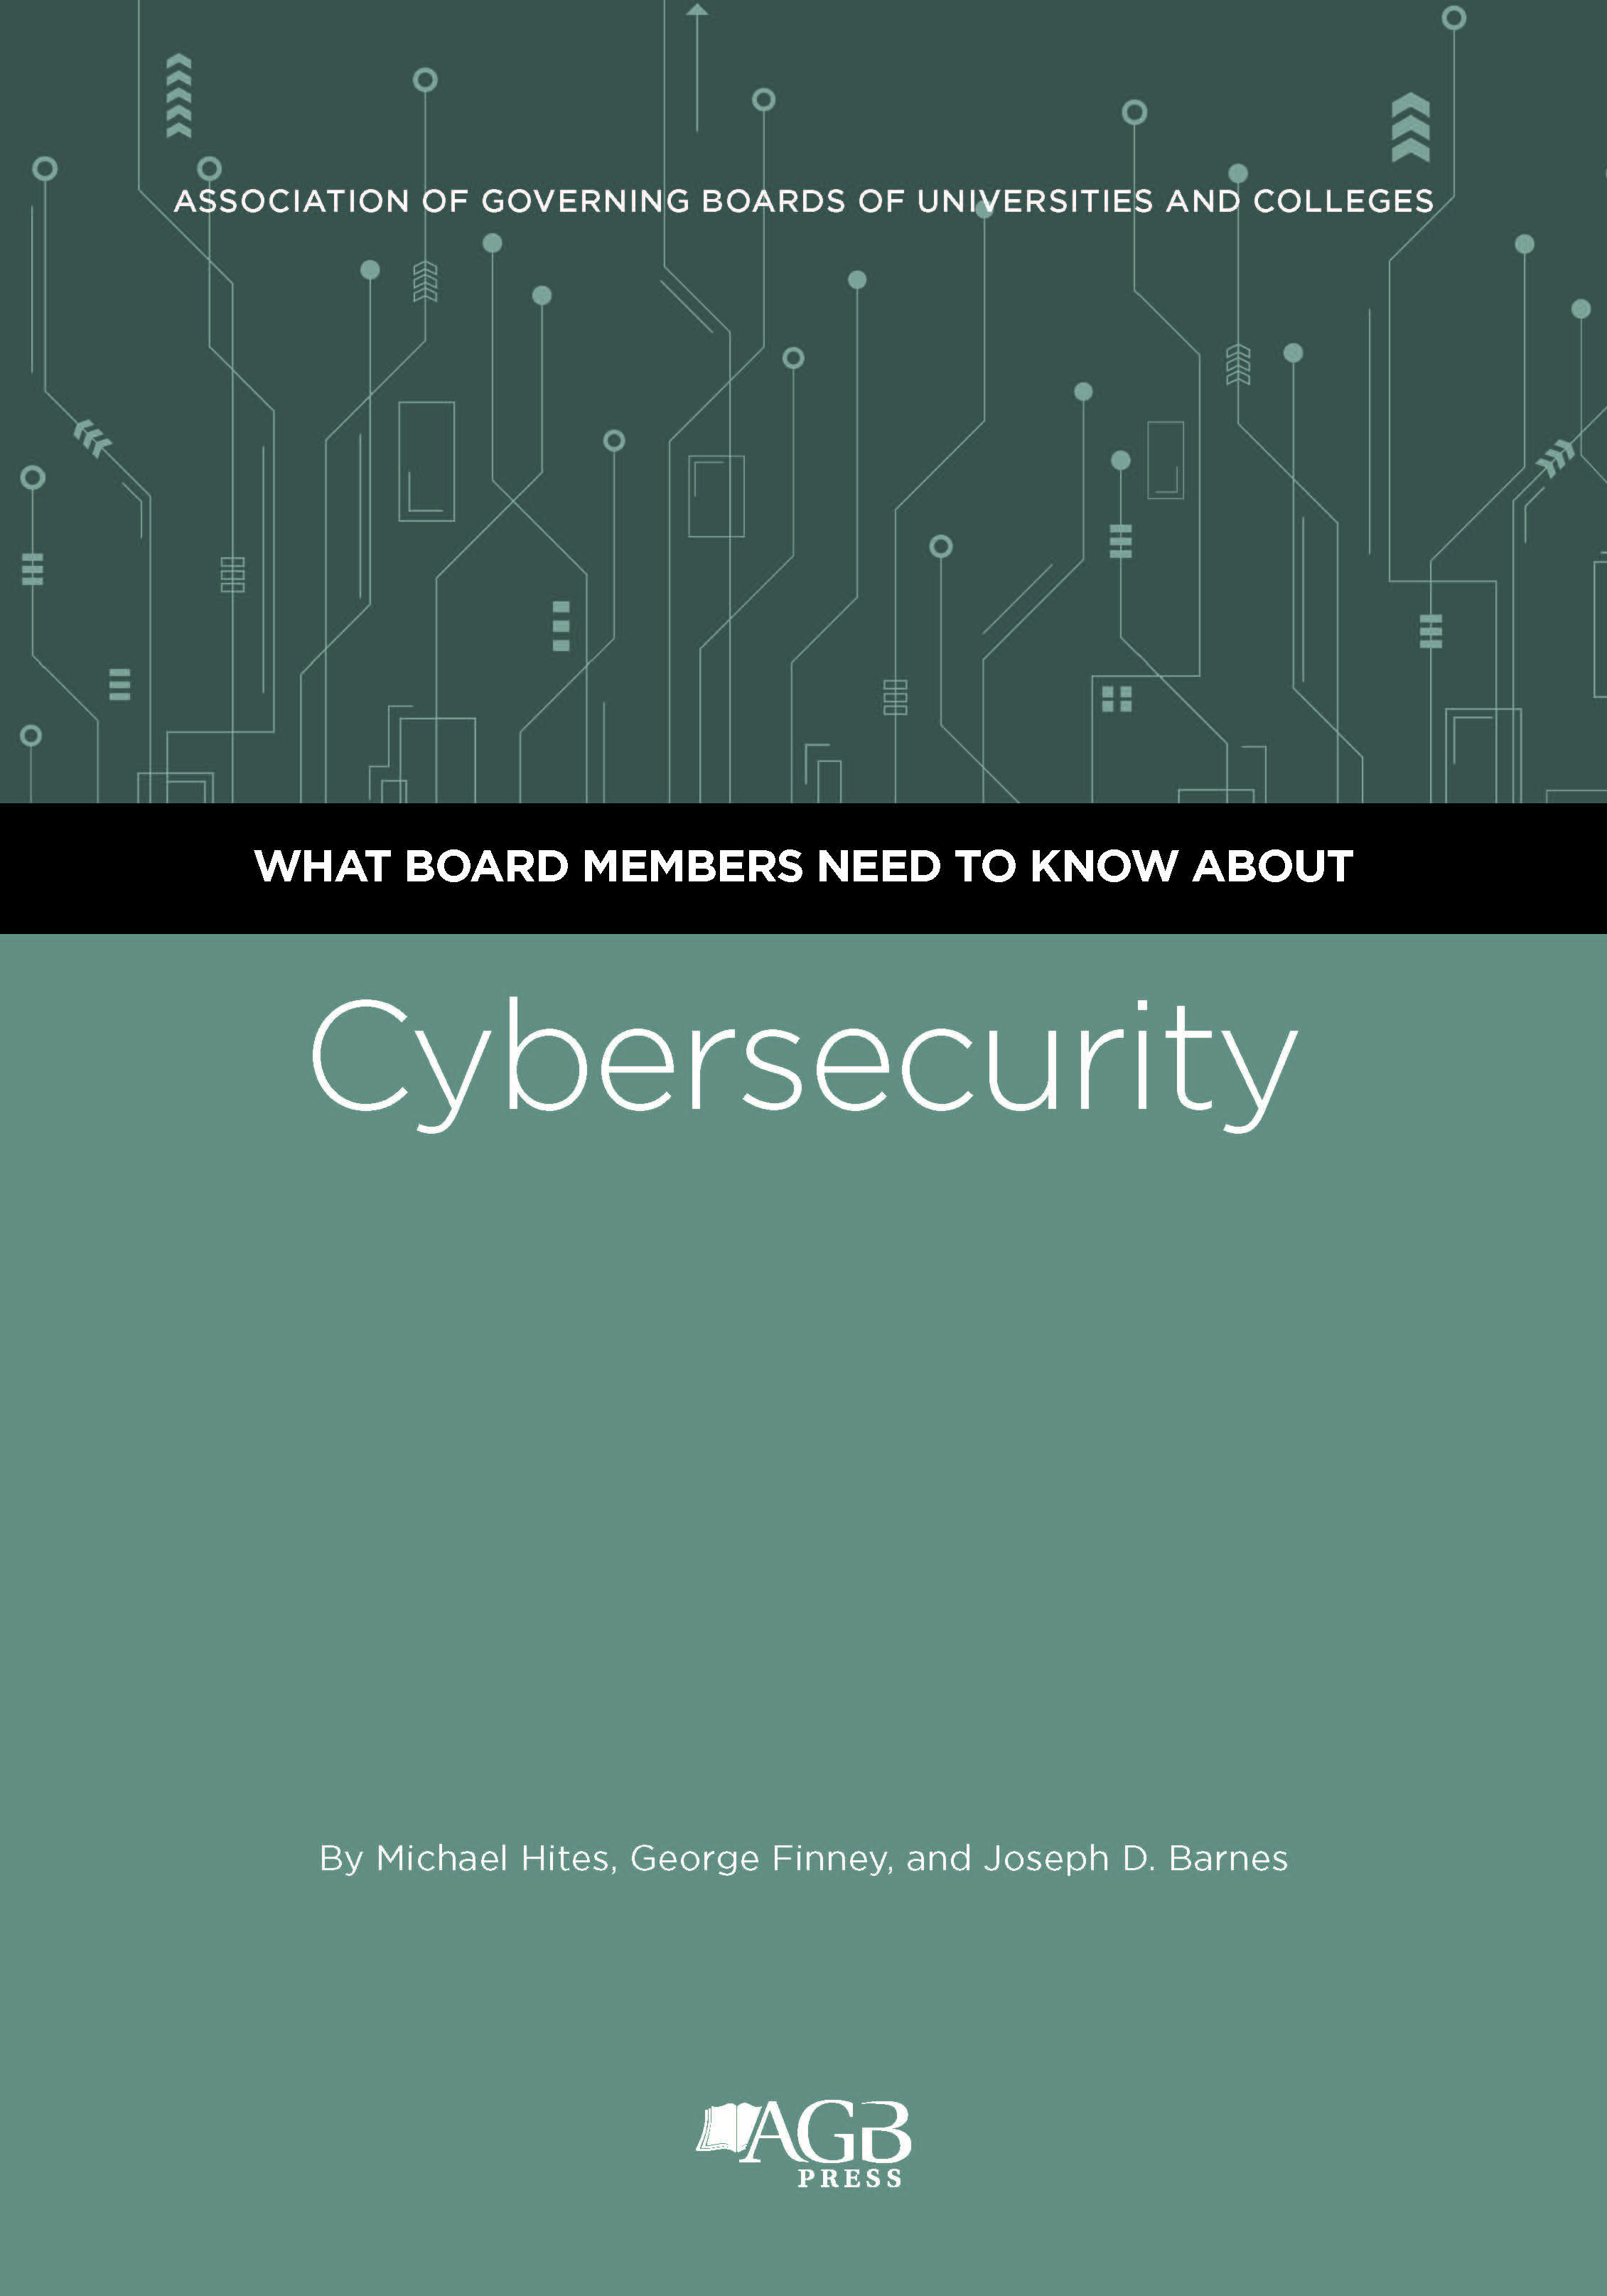 What Board Members Need to Know About Cybersecurity by Michael Hites, George Finney, and Joseph D. Barnes